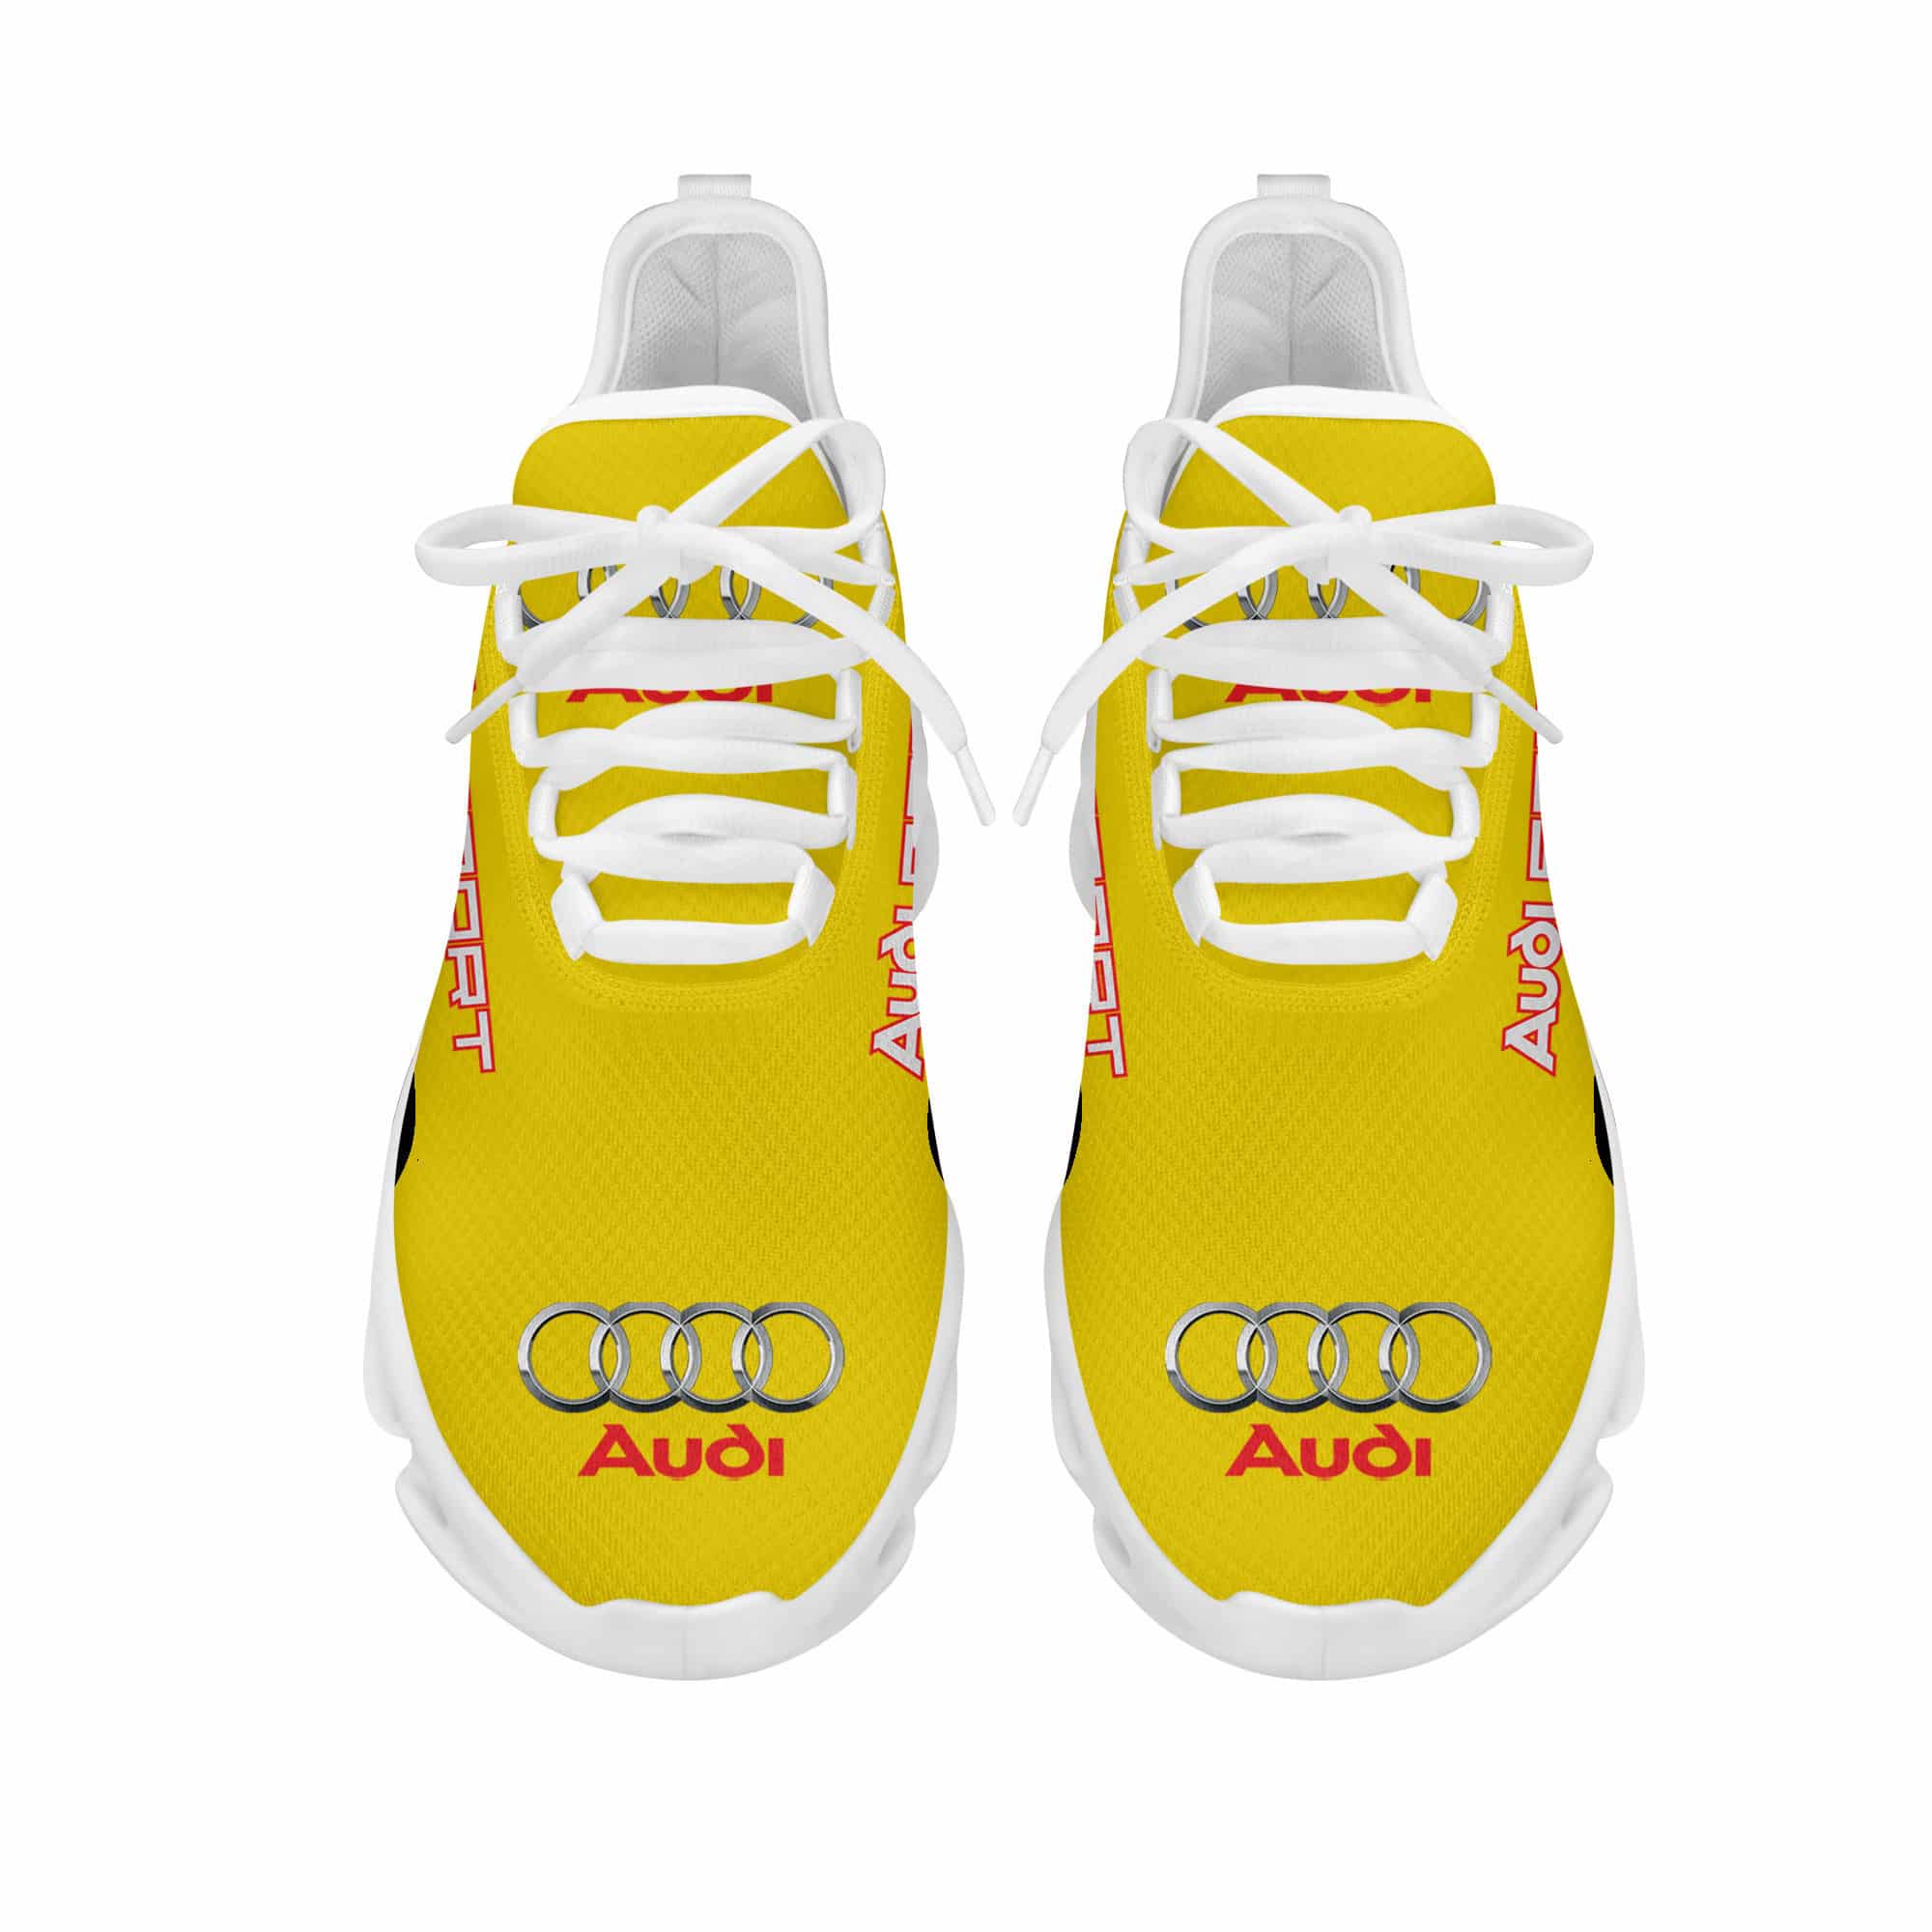 Audi Sport Running Shoes Max Soul Shoes Sneakers Ver 1 3